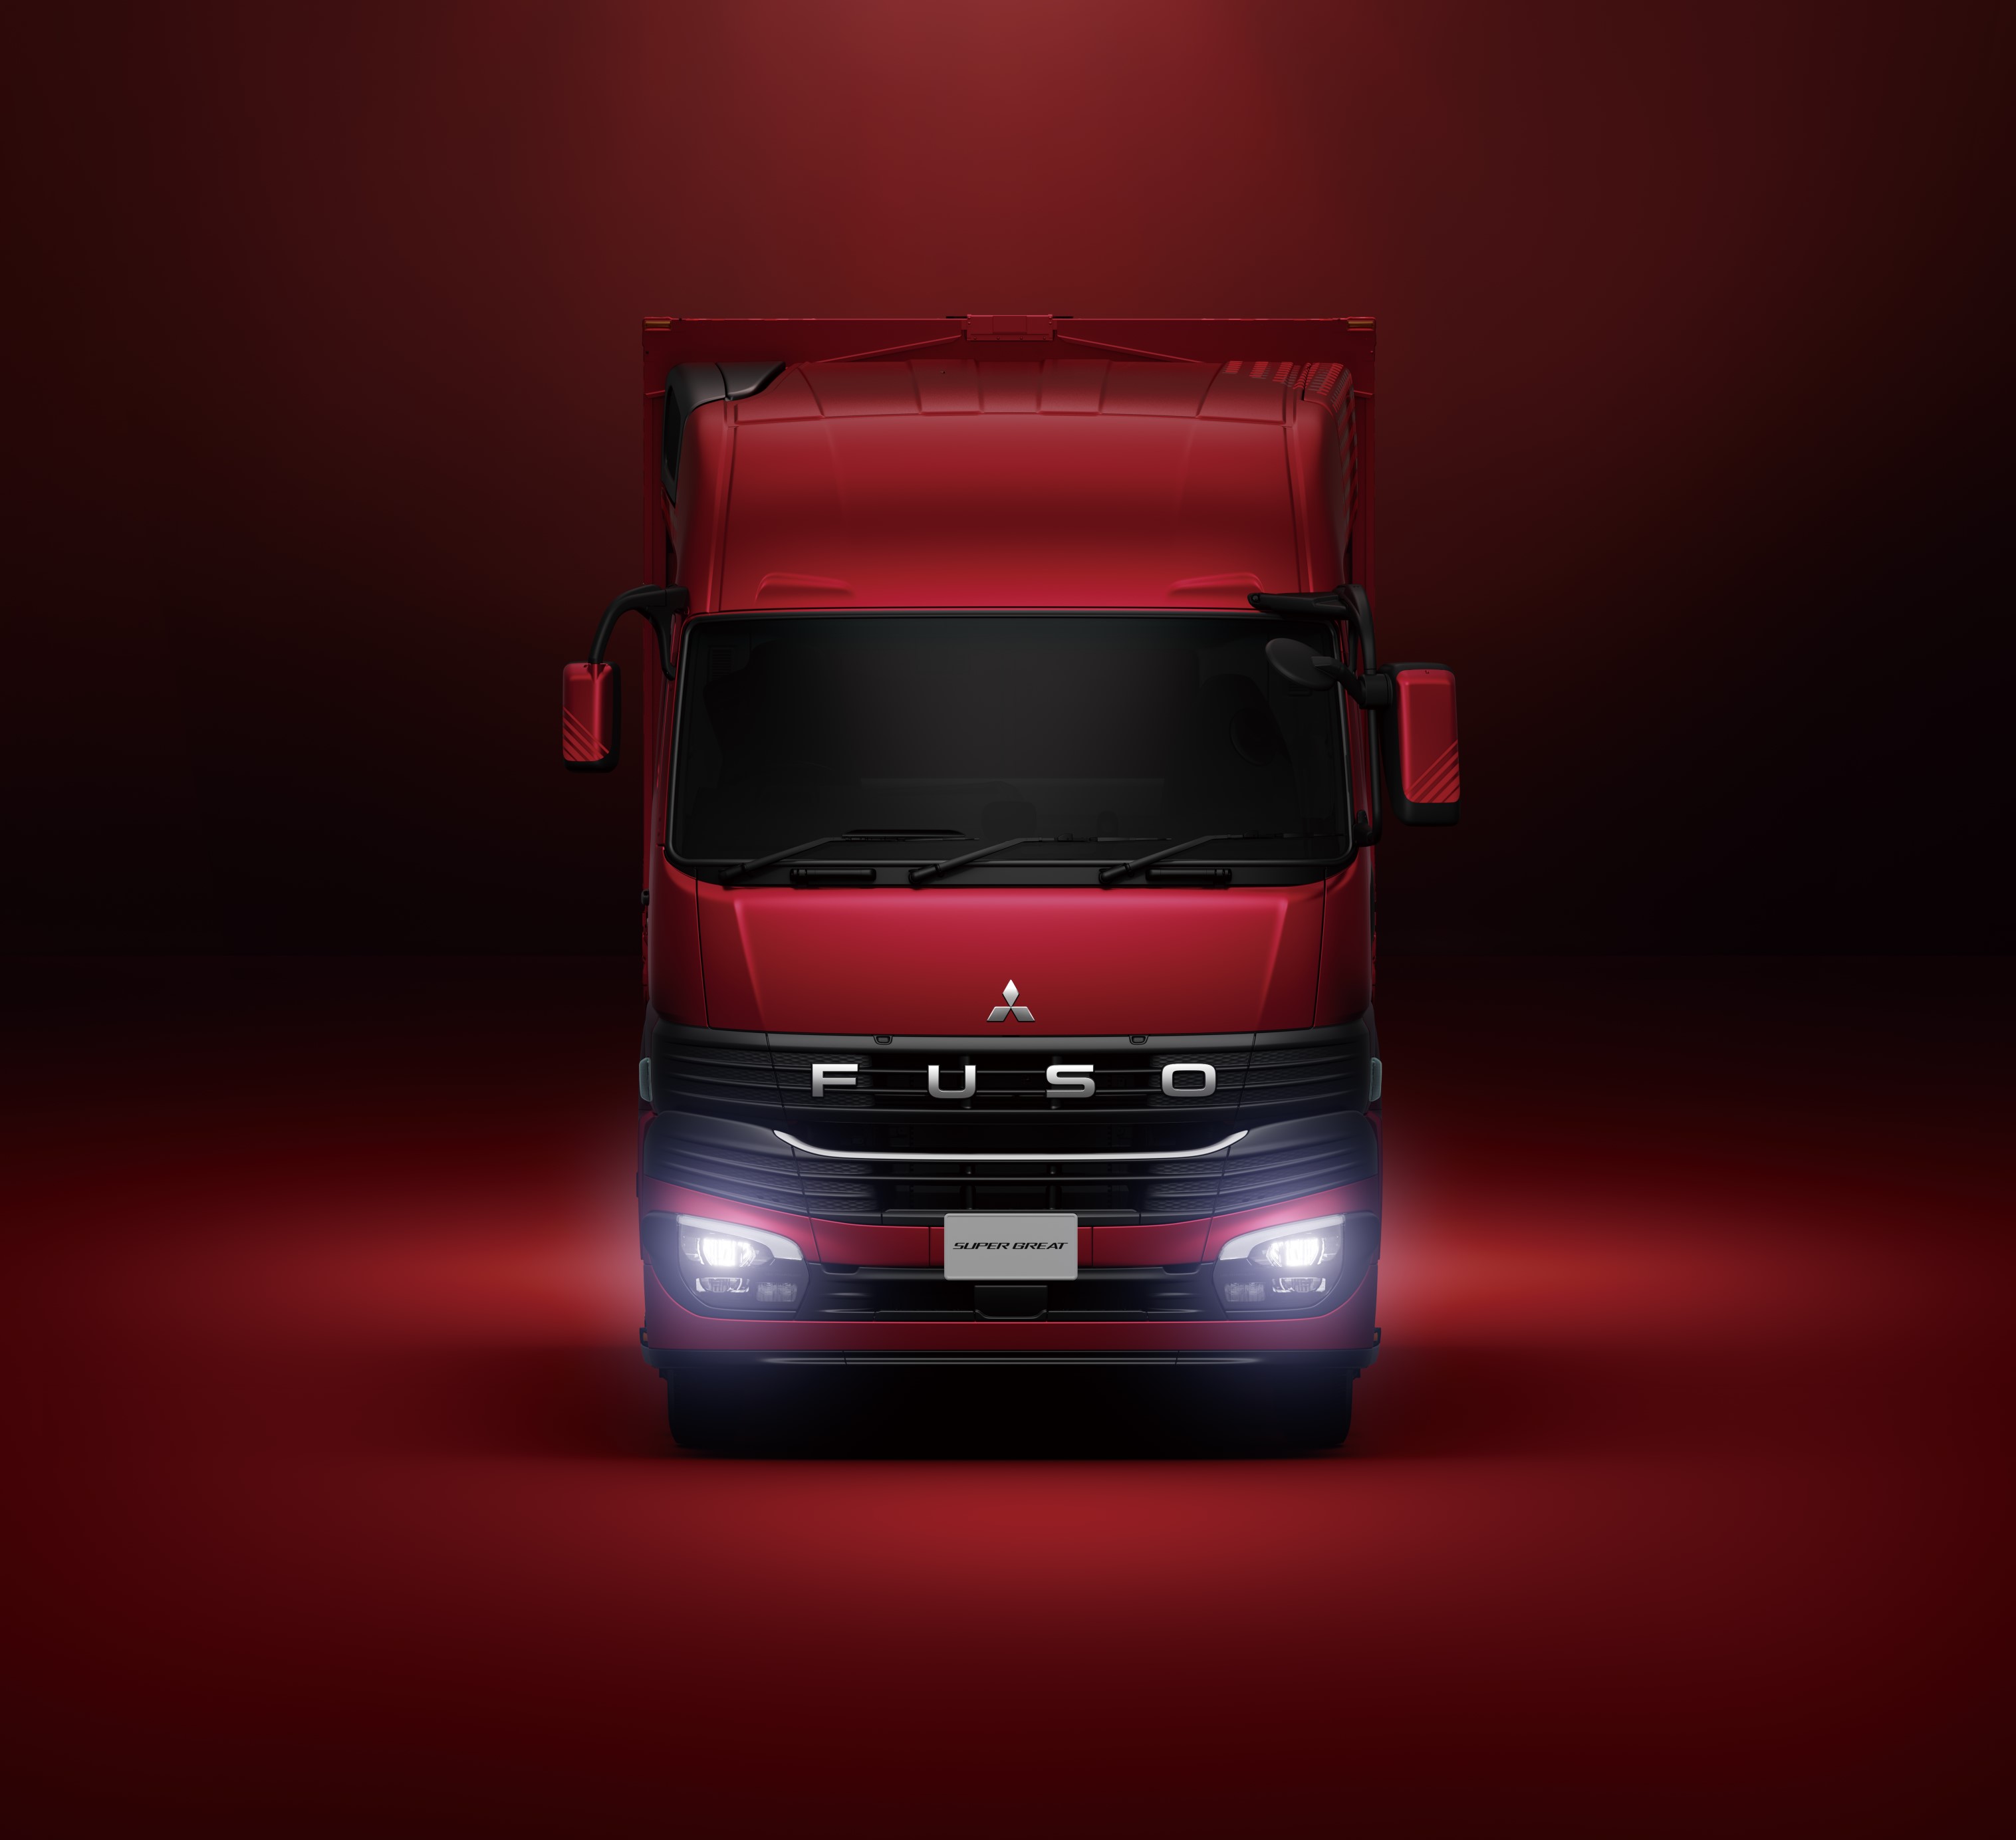 Mitsubishi Fuso unveils the fully remodeled heavy-duty Super Great truck